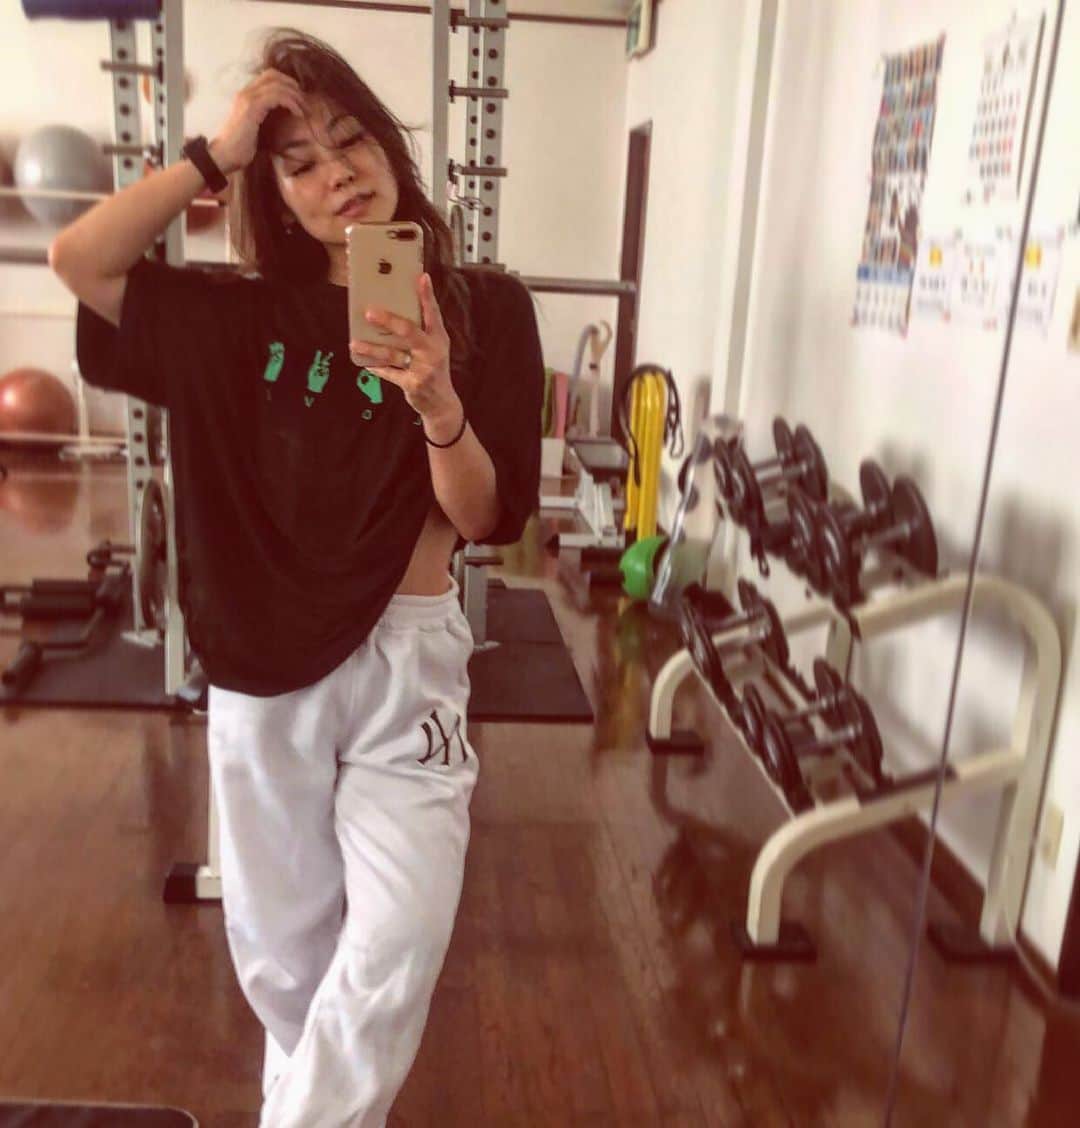 Beauty Of Pilates by Asamiのインスタグラム：「1月4日からライブレッスン開始してずーっと筋肉痛😅恥ずかしい🐯💦 (ちなみにオンラインの家トレーニング　@workoutcommunity_jp ) 2022年もレッスン内容をパワーアップ＆リニューアルして飛ばしていきます☄️  My legs, abs, arms,,, my whole body has been shaking since new year begins. You know what I’m doing/teaching, right? 💪🏼 I got this!   #ラグリーフィットネス  #ライブレッスン　#ボディメイク　#家トレ　 #lagreefitness #staystrongphysicallyandmentally #keepitreal #beyourownmotivation」